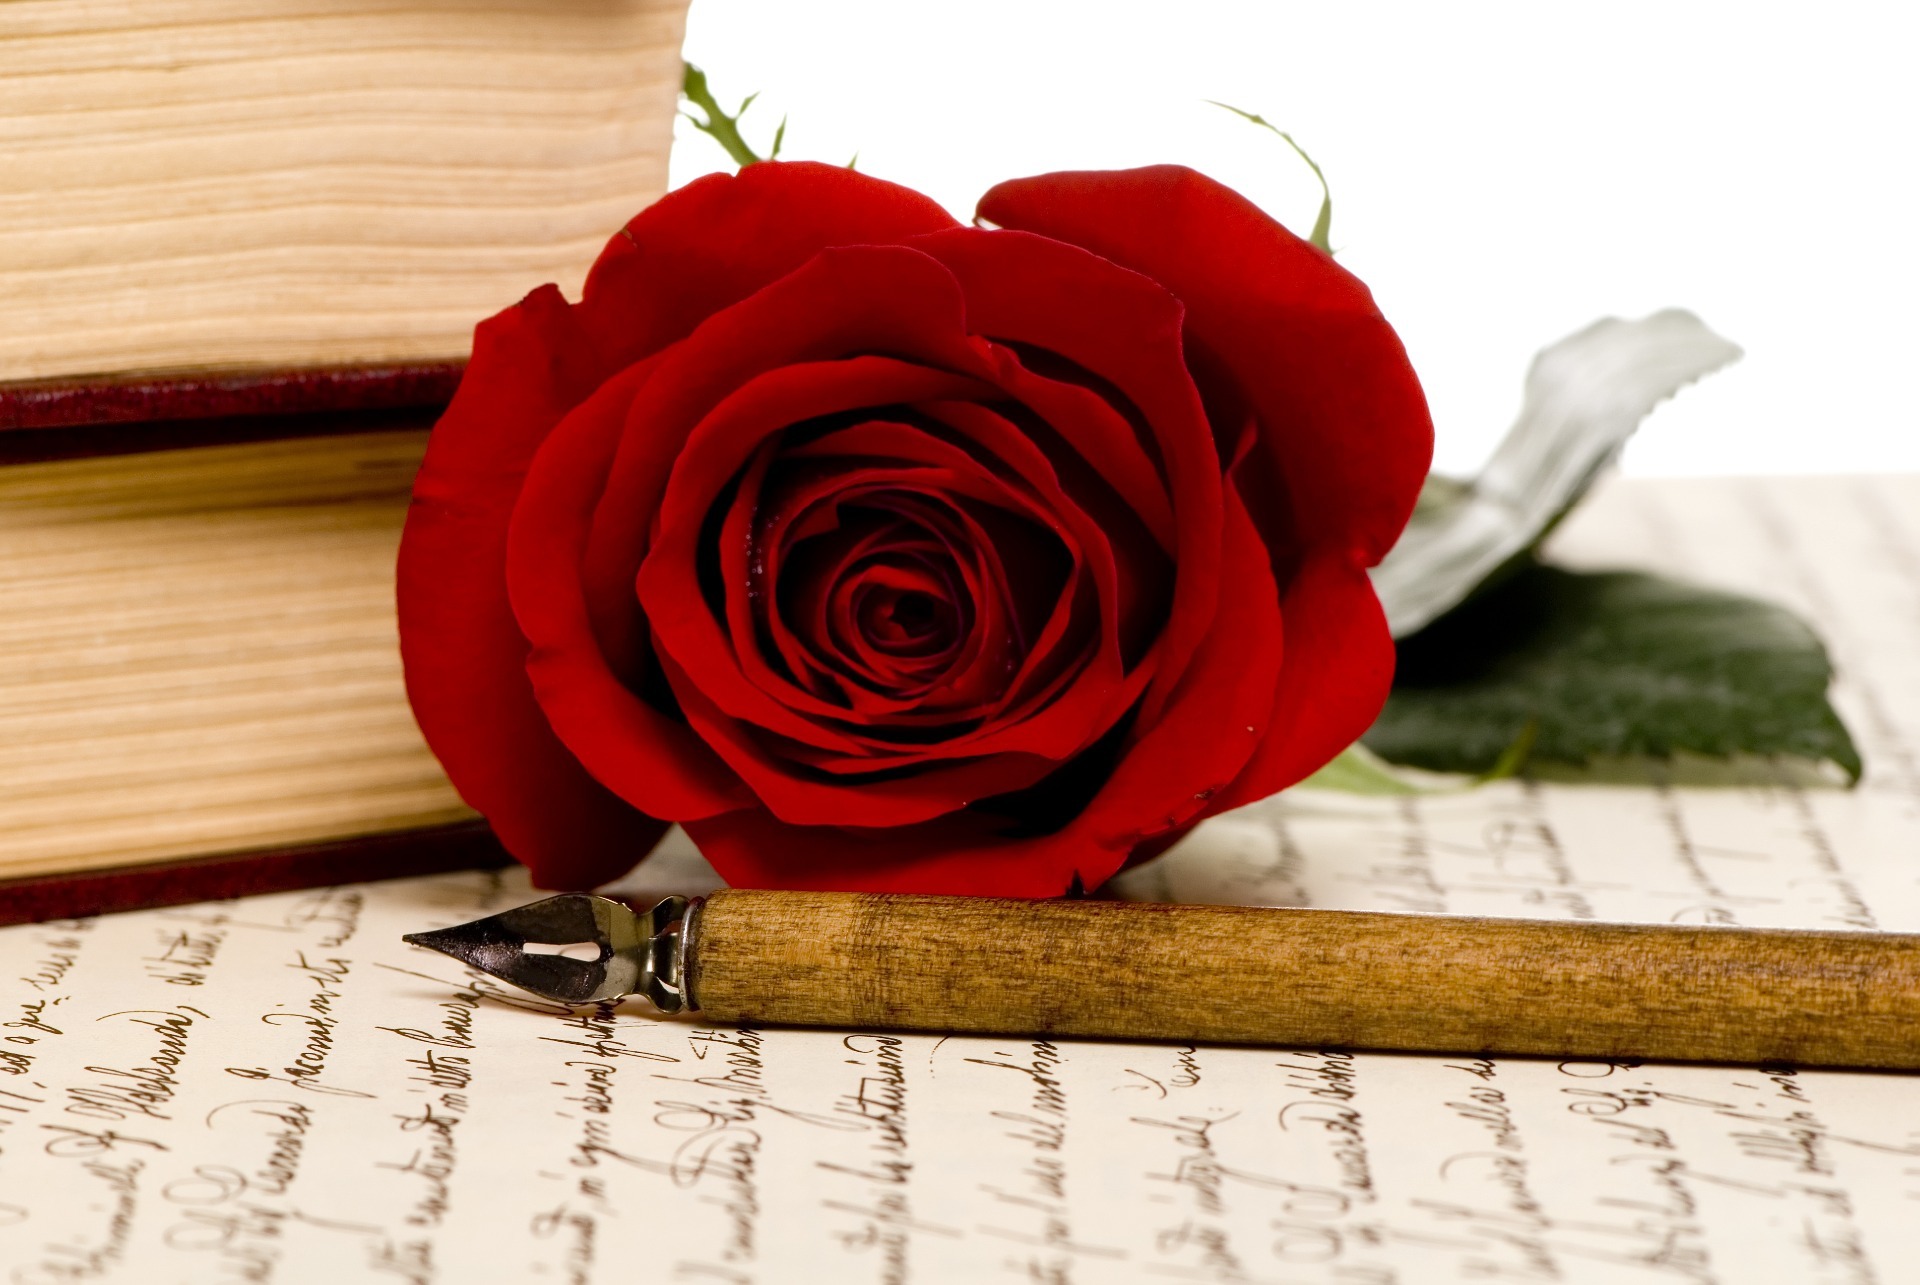 A red rose resting on a scroll of paper.